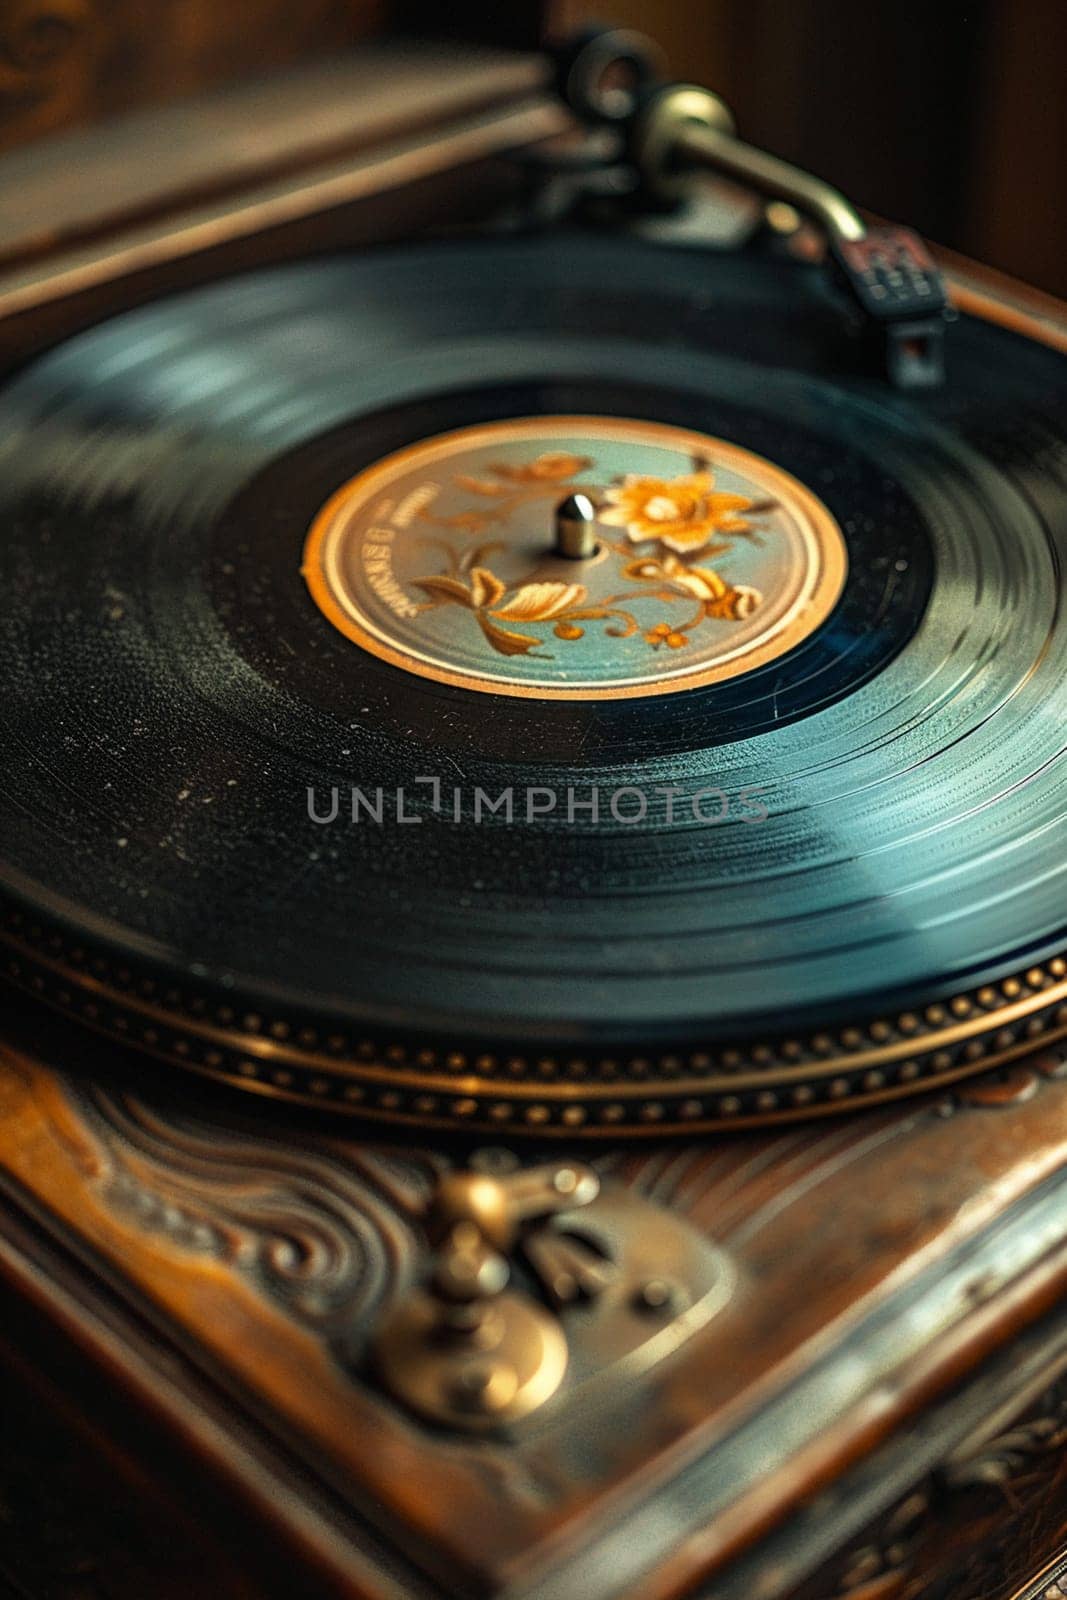 Vintage record player with vinyl, symbolizing the timeless joy of music